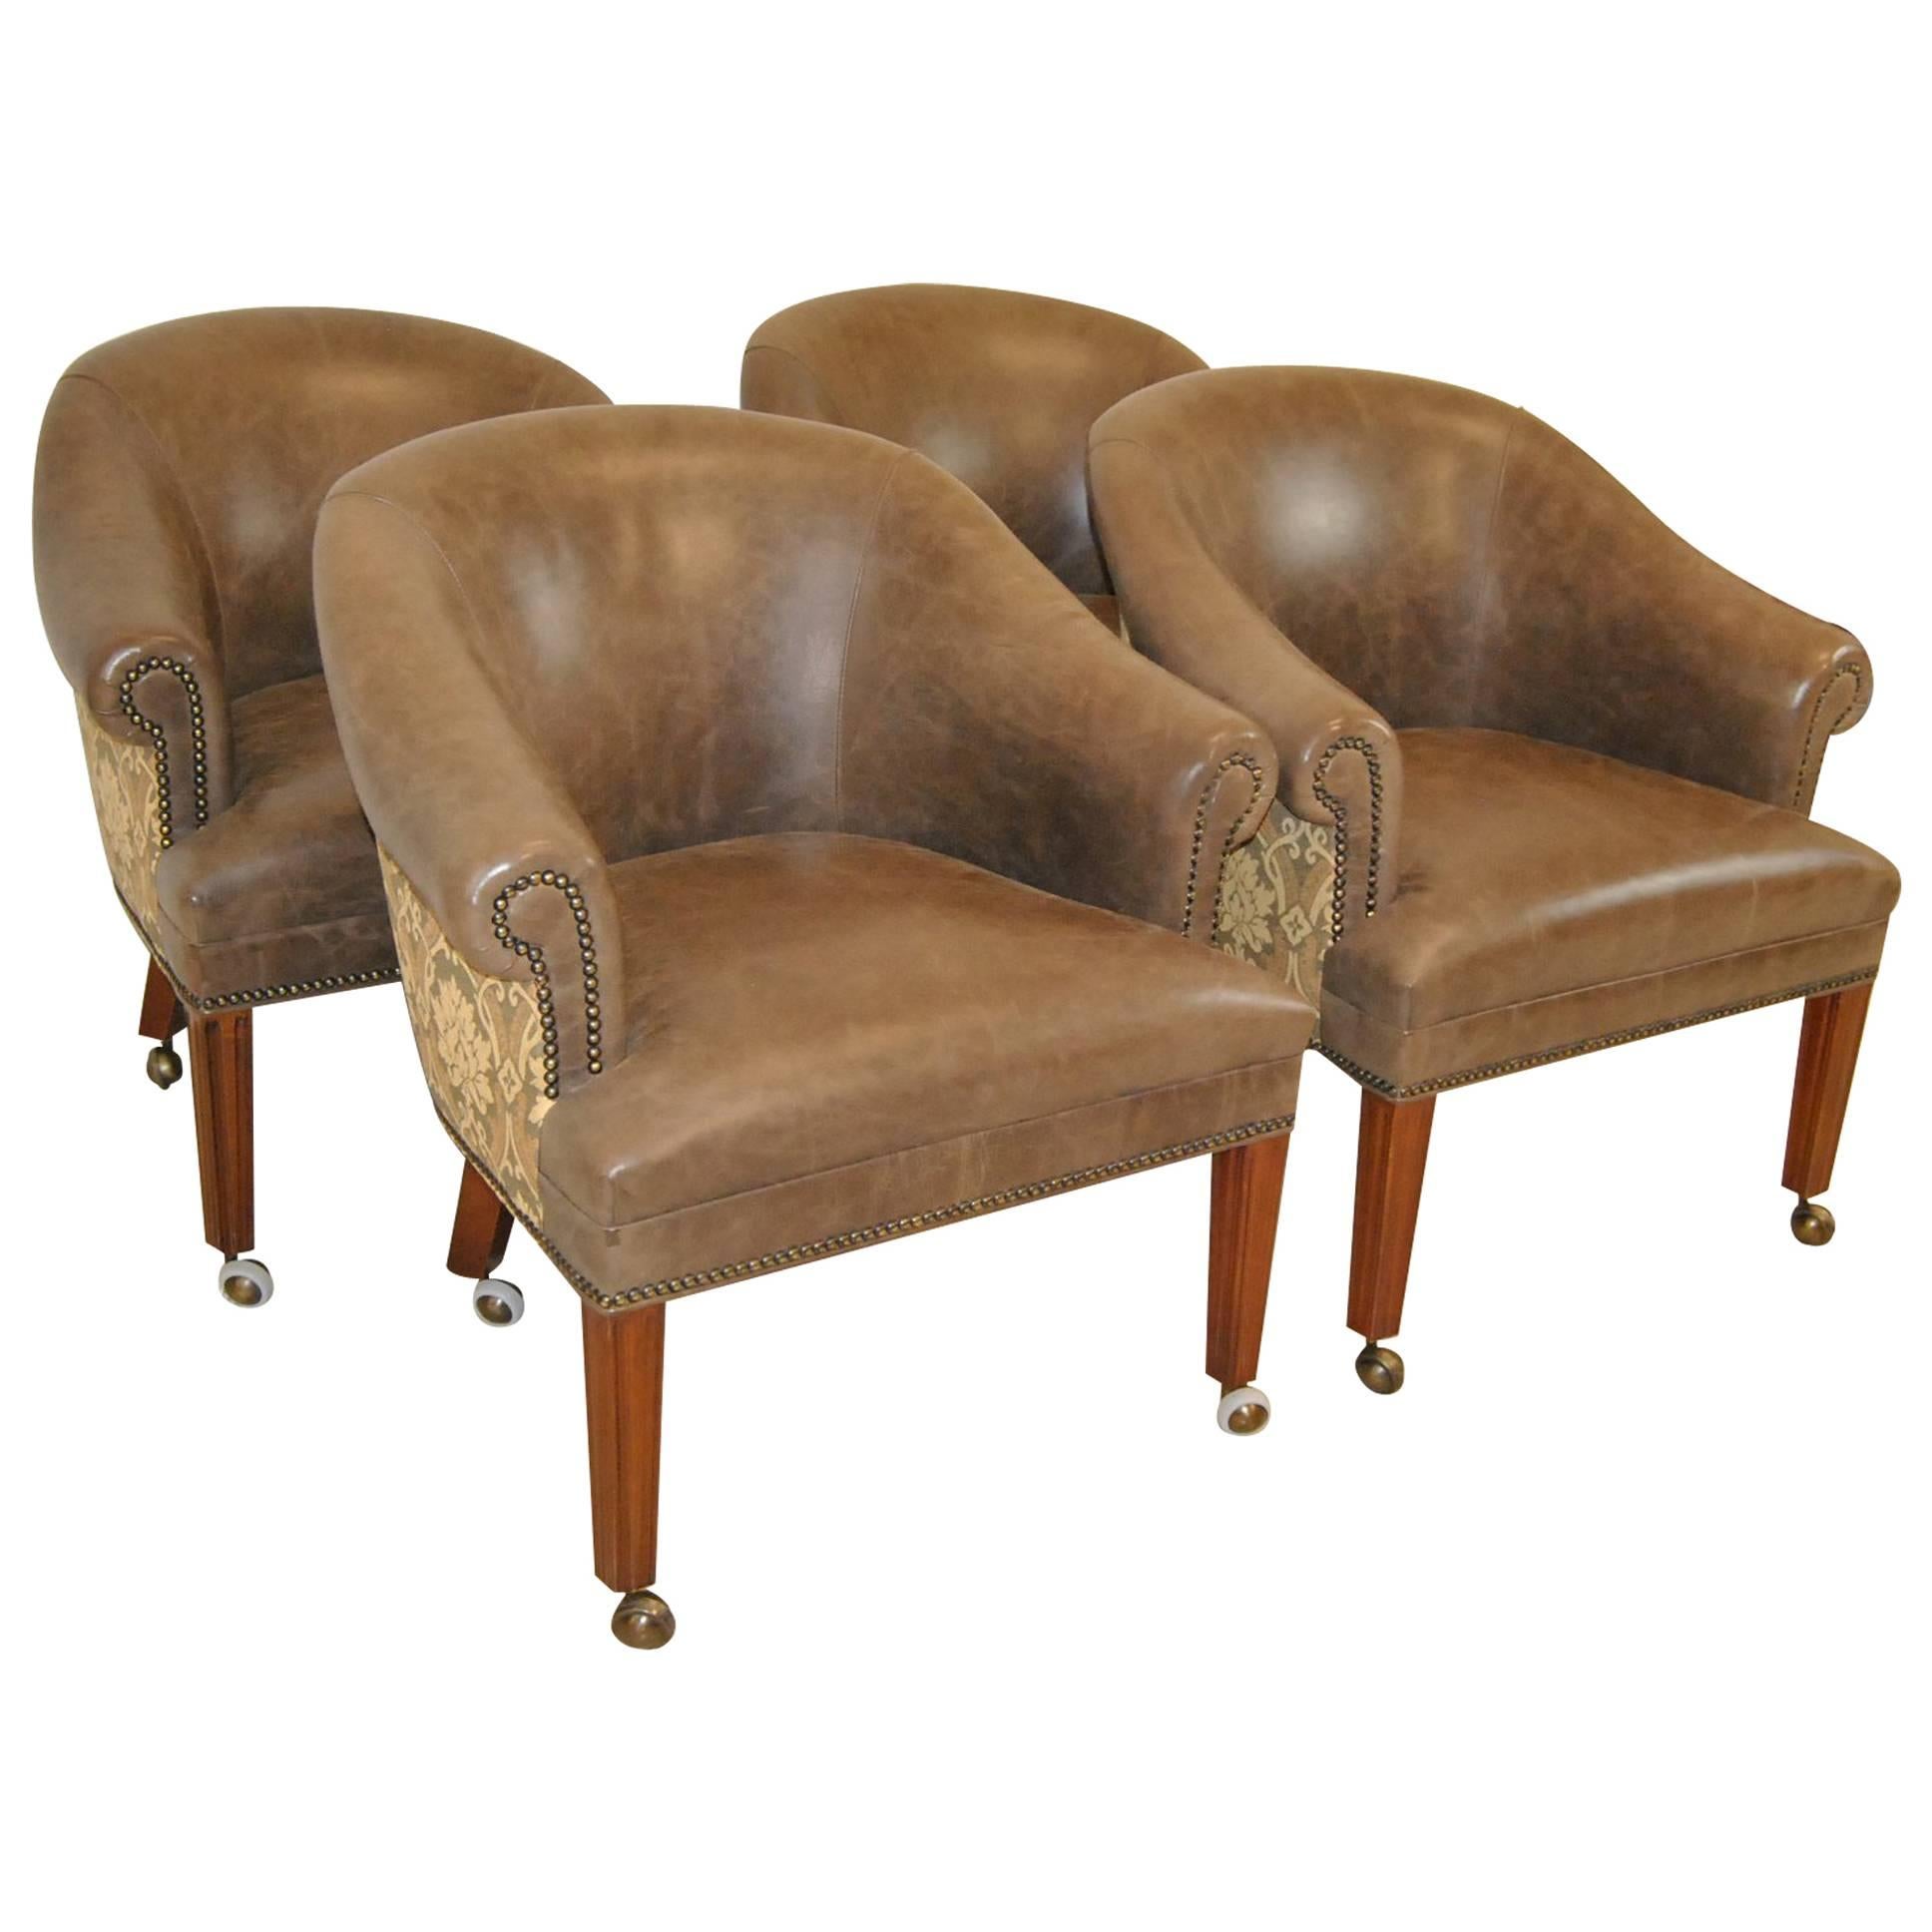 Set of Four Leather and Tapestry Upholstered Tub Chairs by Hancock & Moore